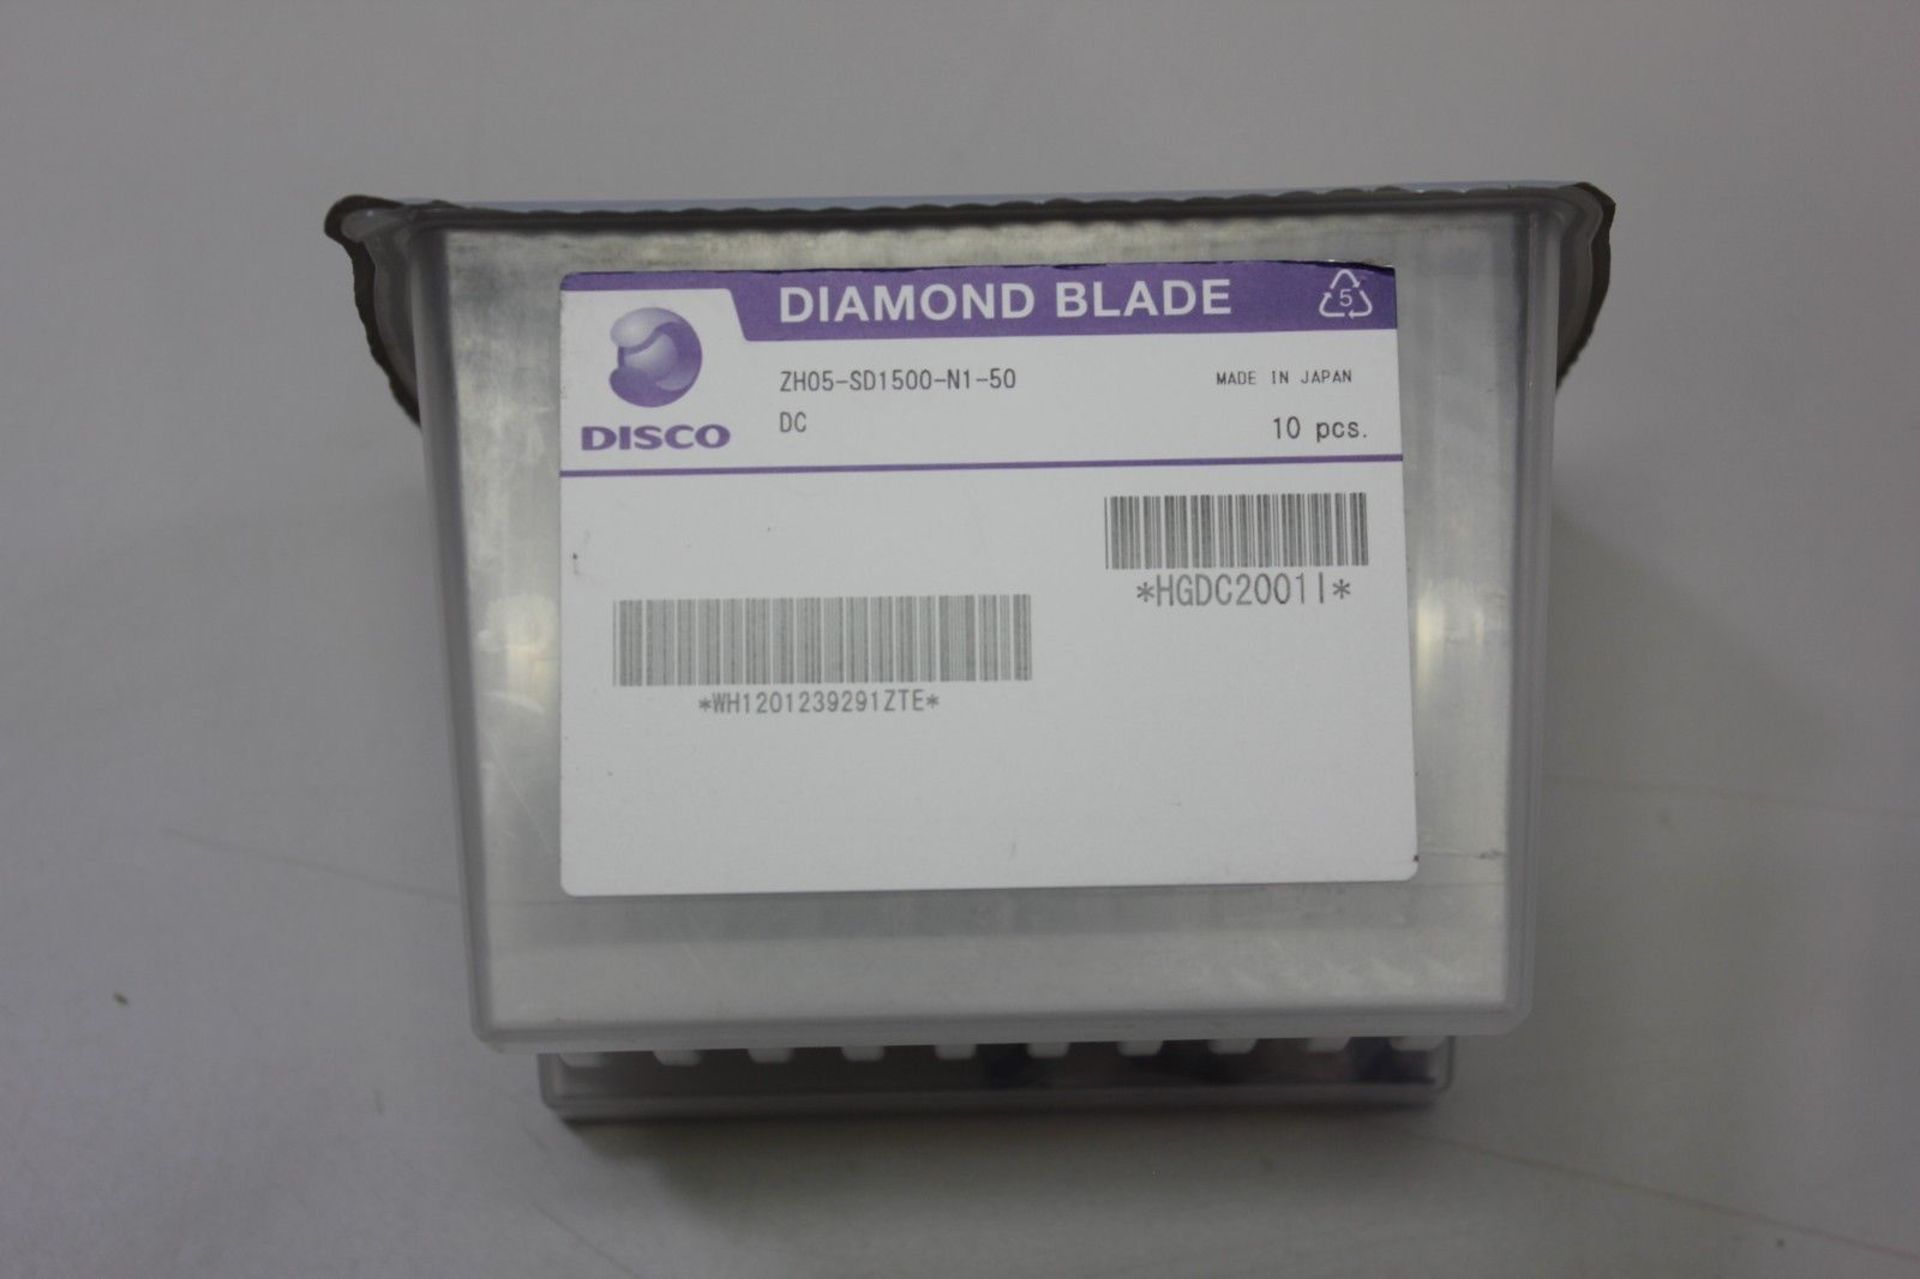 10 New Factory Sealed Disco Silicon Wafer/Semiconductor Diamond Blades - Image 2 of 3